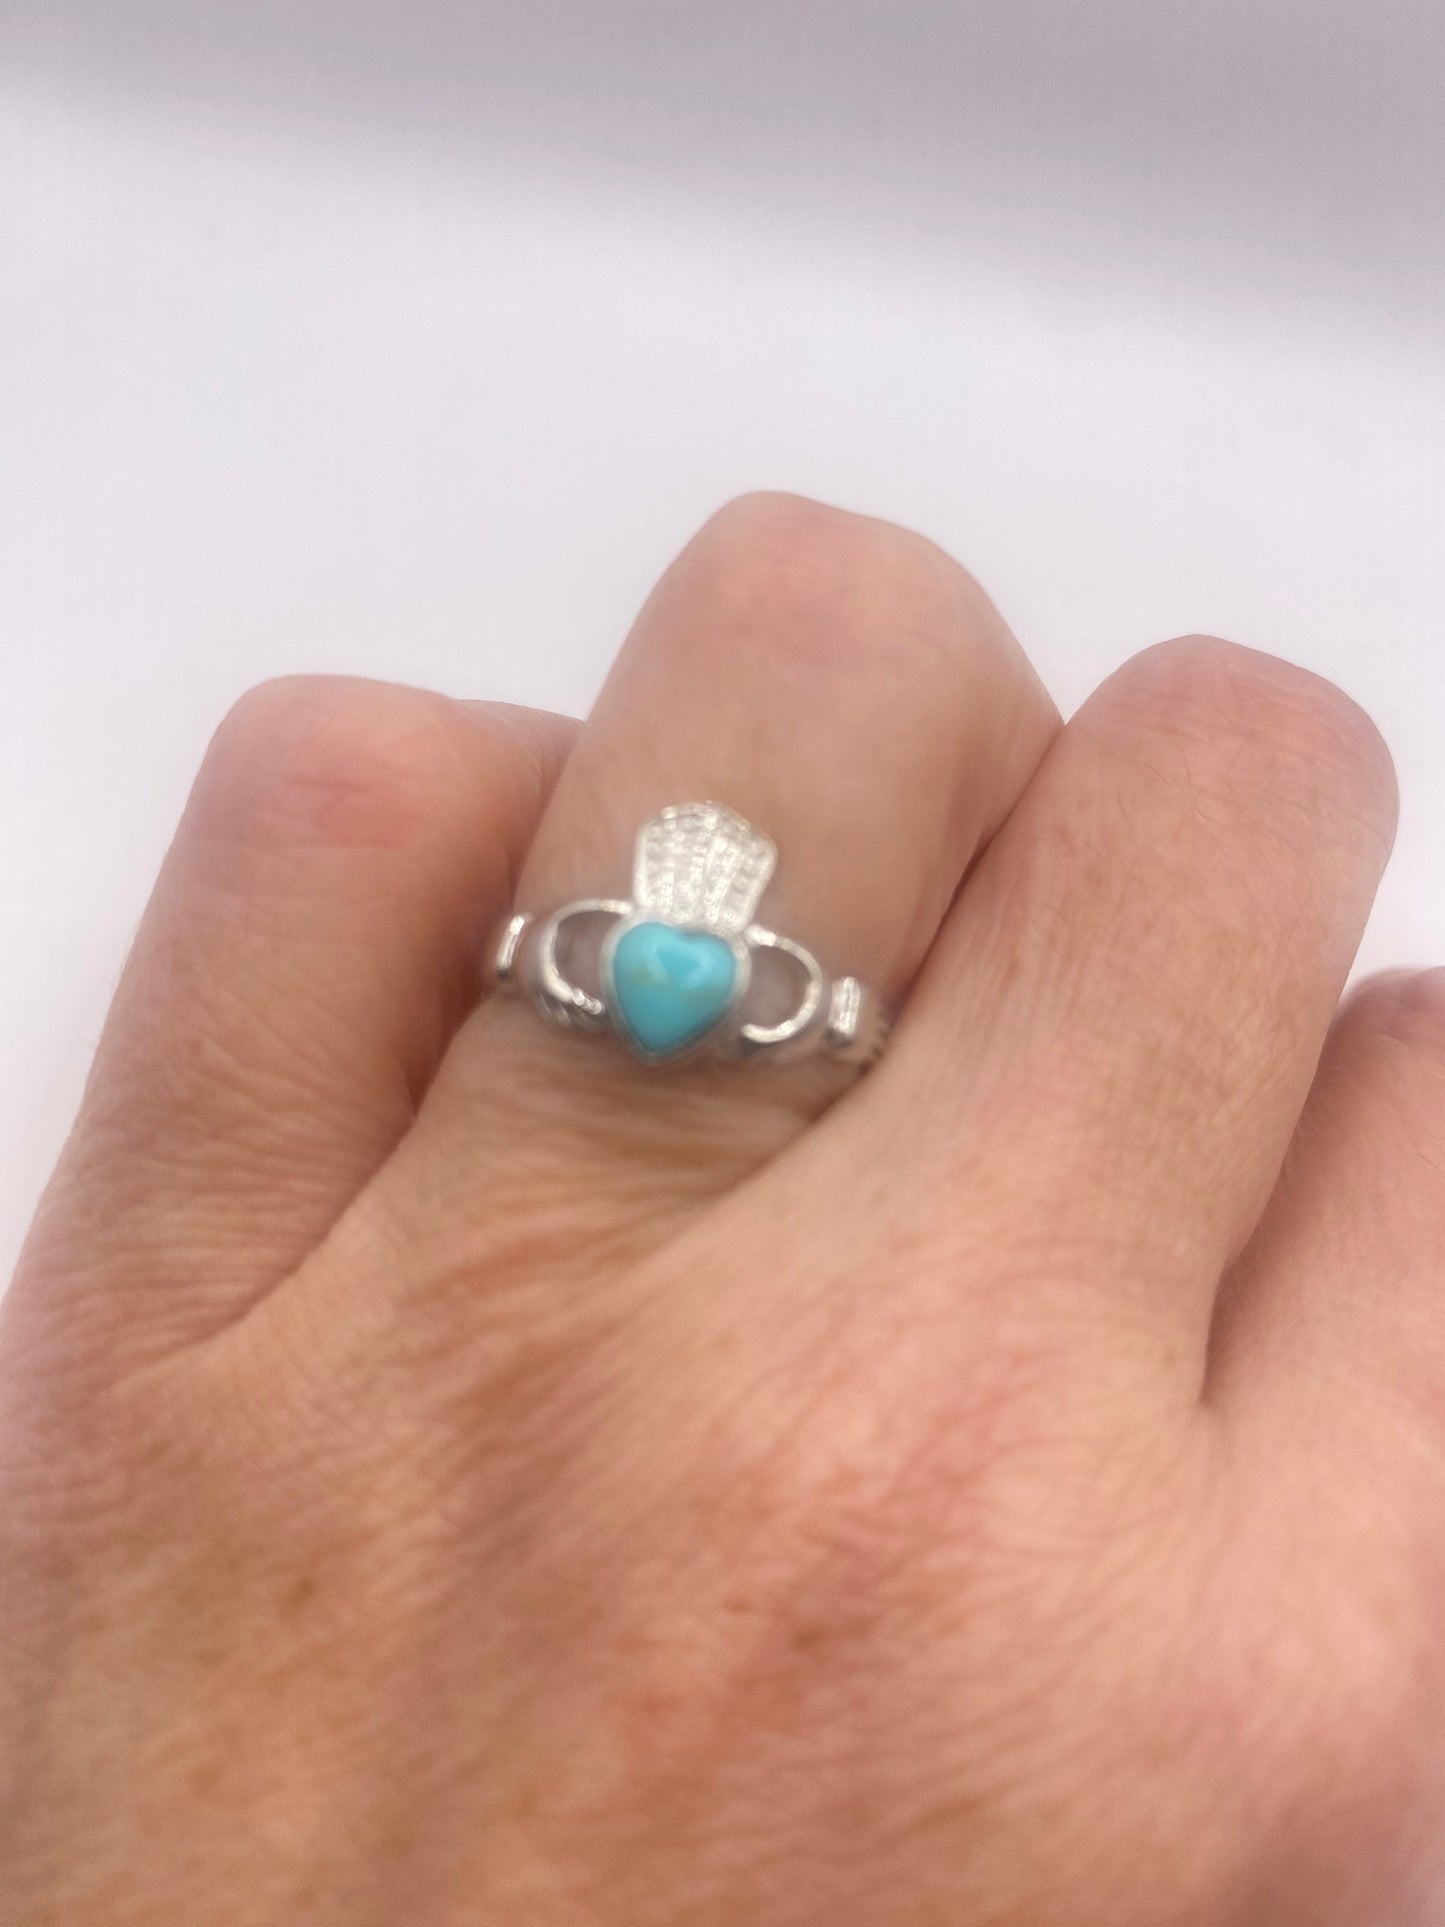 Vintage 925 Sterling Silver Turquoise Claddagh Ring